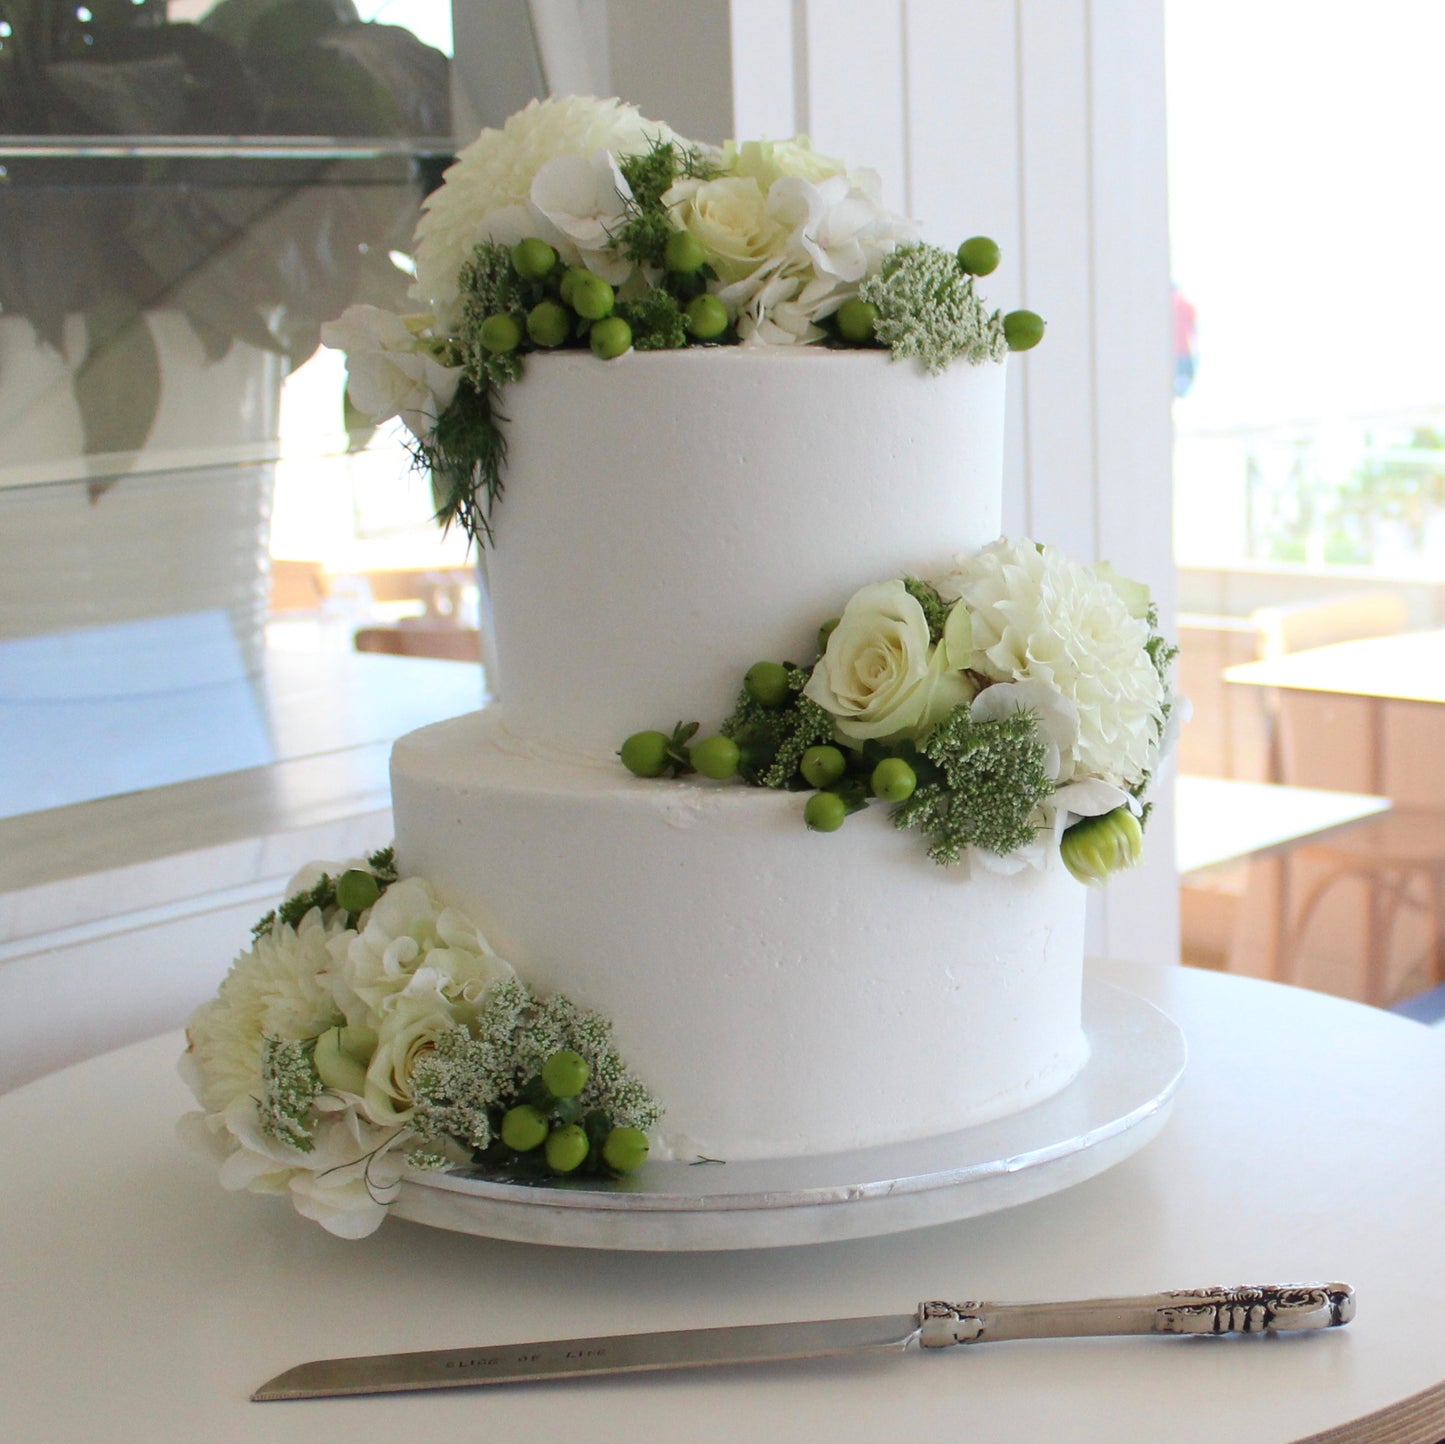 2 Tier Buttercream with White & Green Flowers